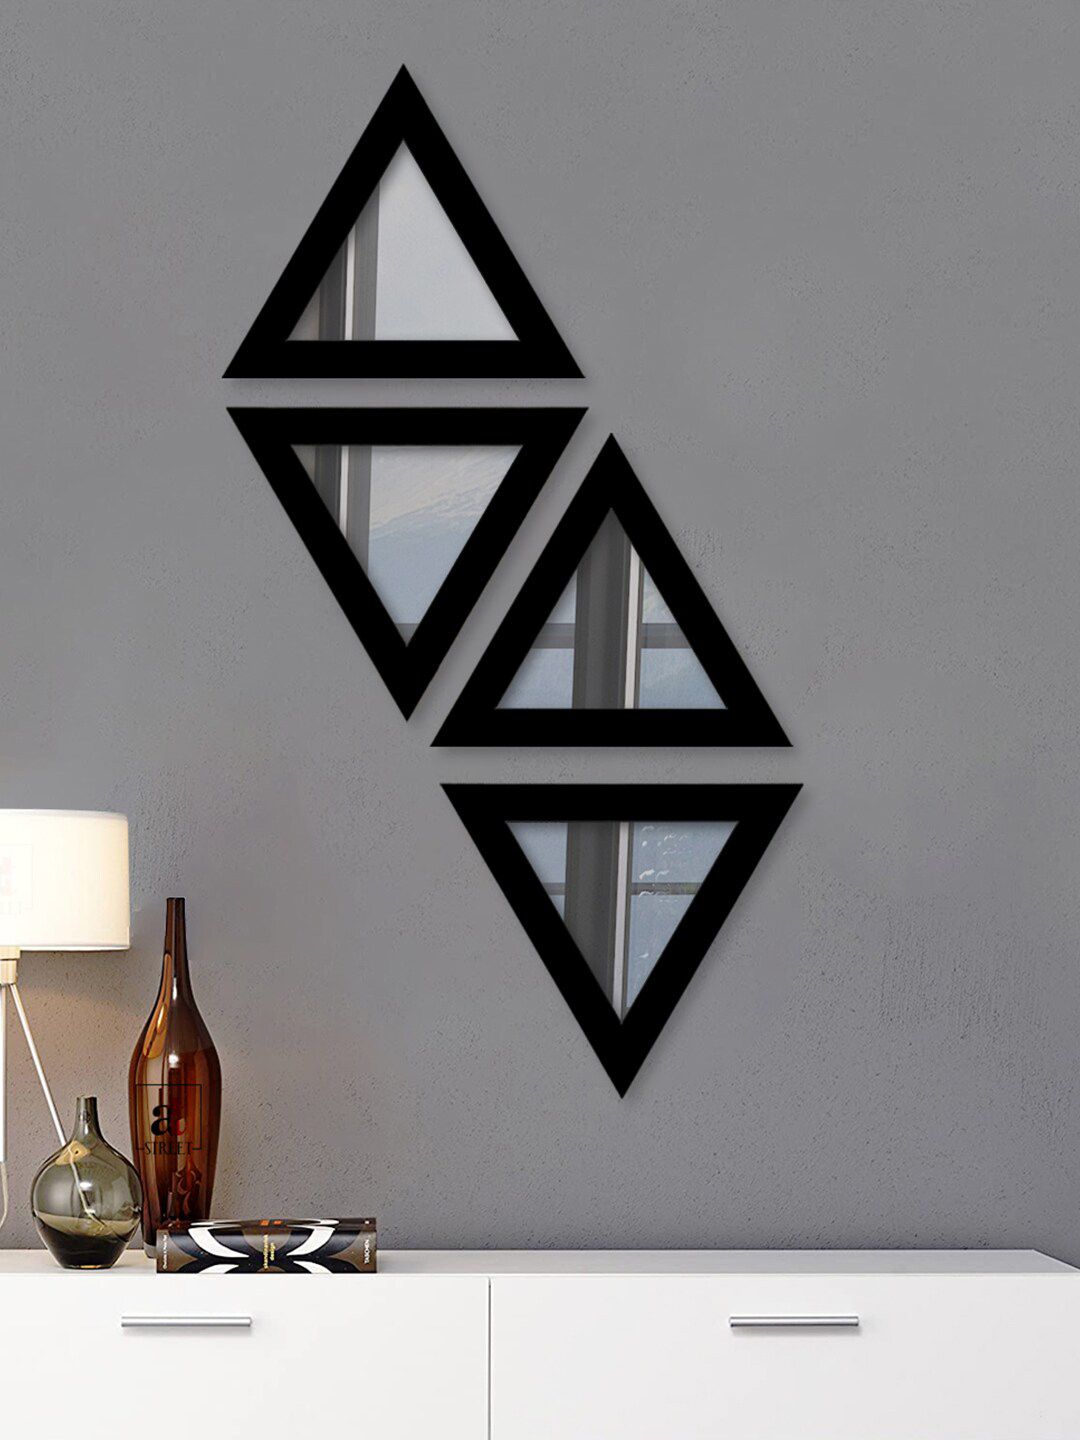 Art Street Set Of 4 Black Solid Decorative Triangle-Shaped Wall Mirrors Price in India